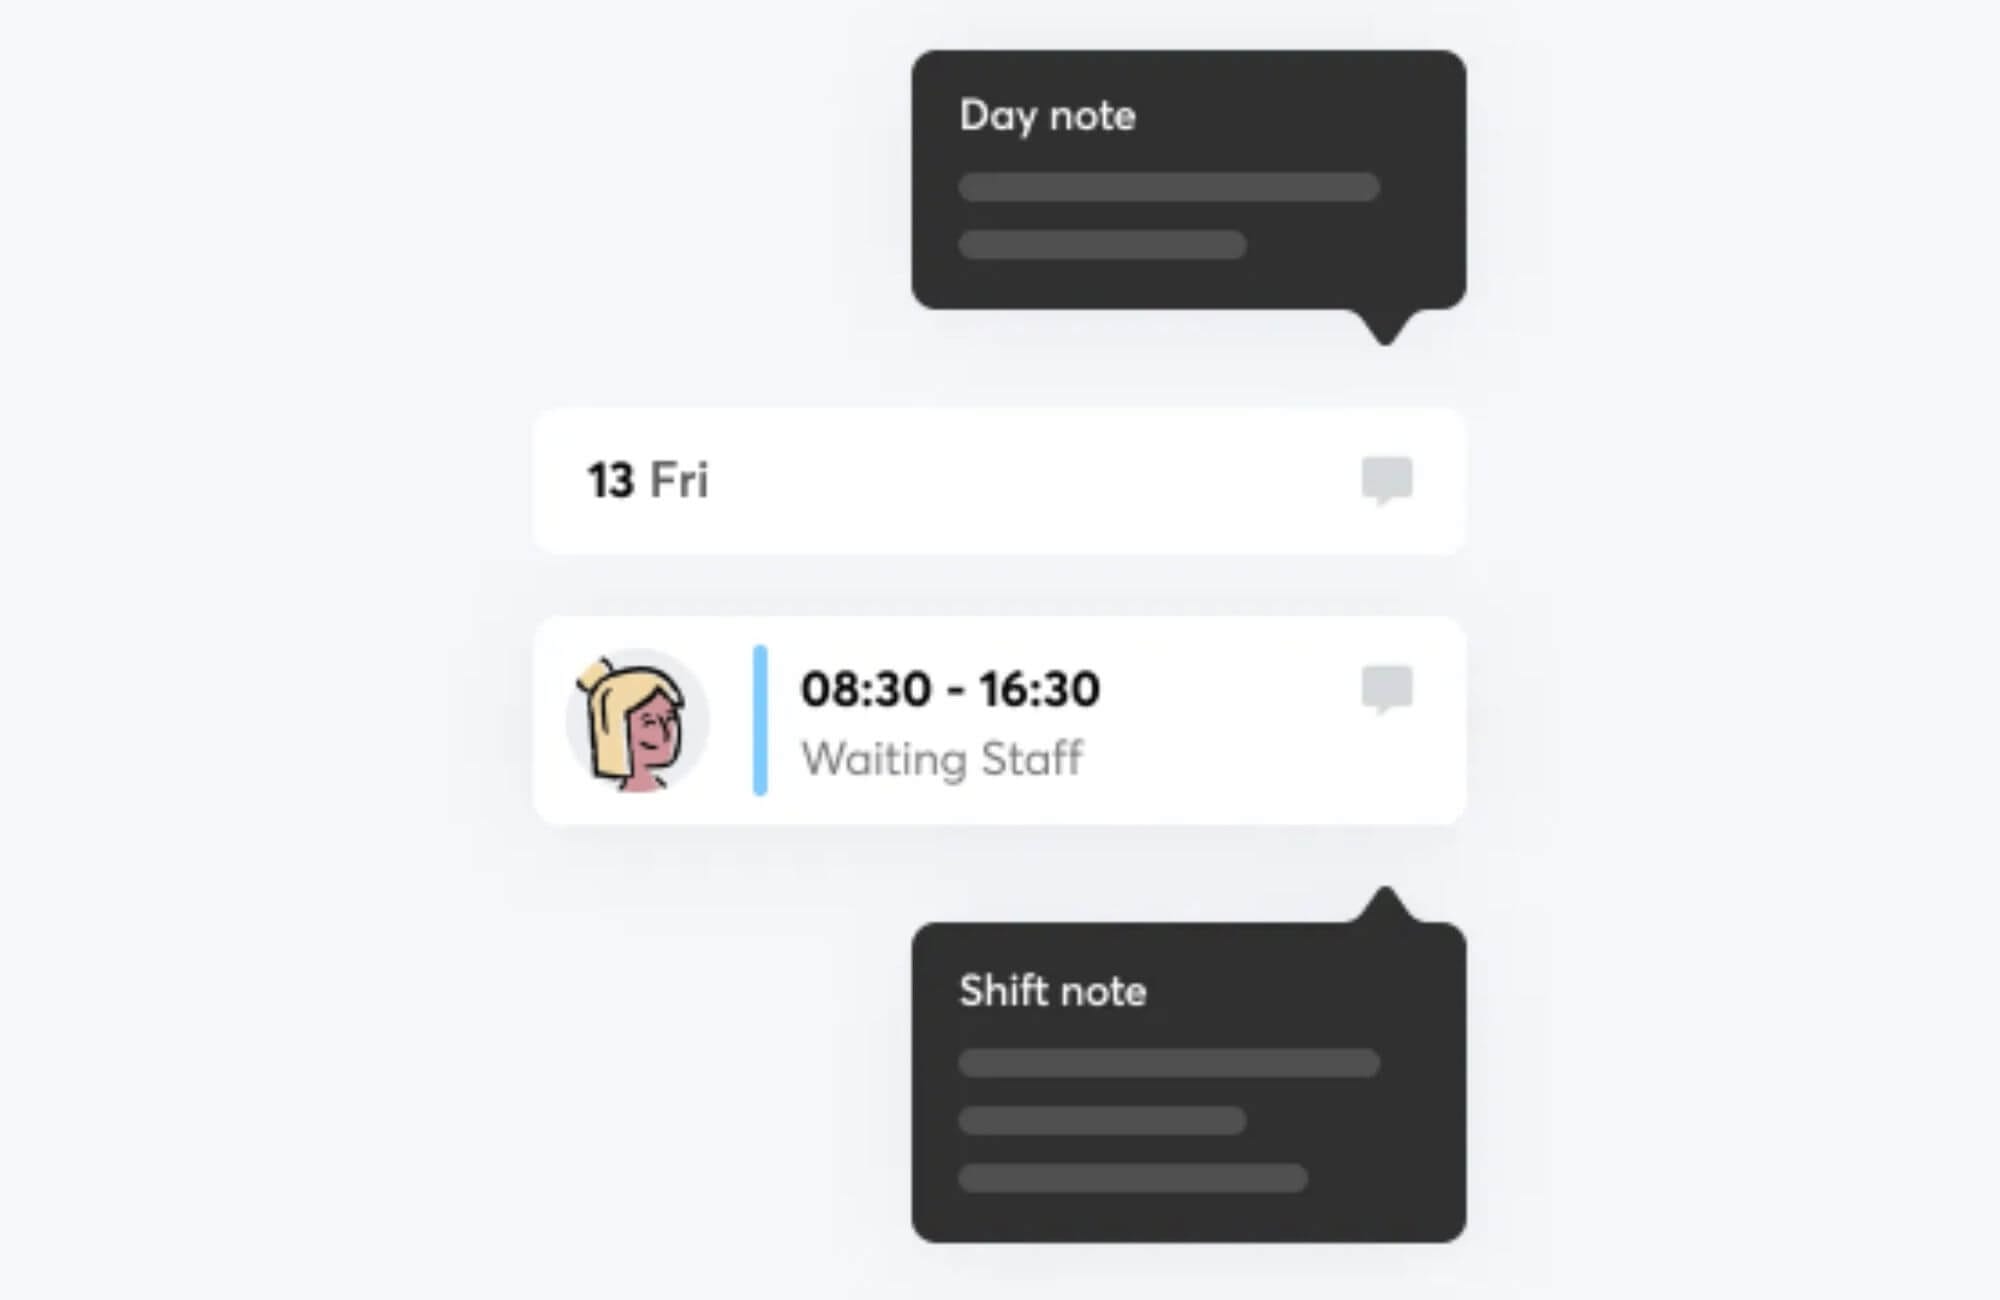 Creating a day note in the RotaCloud web app